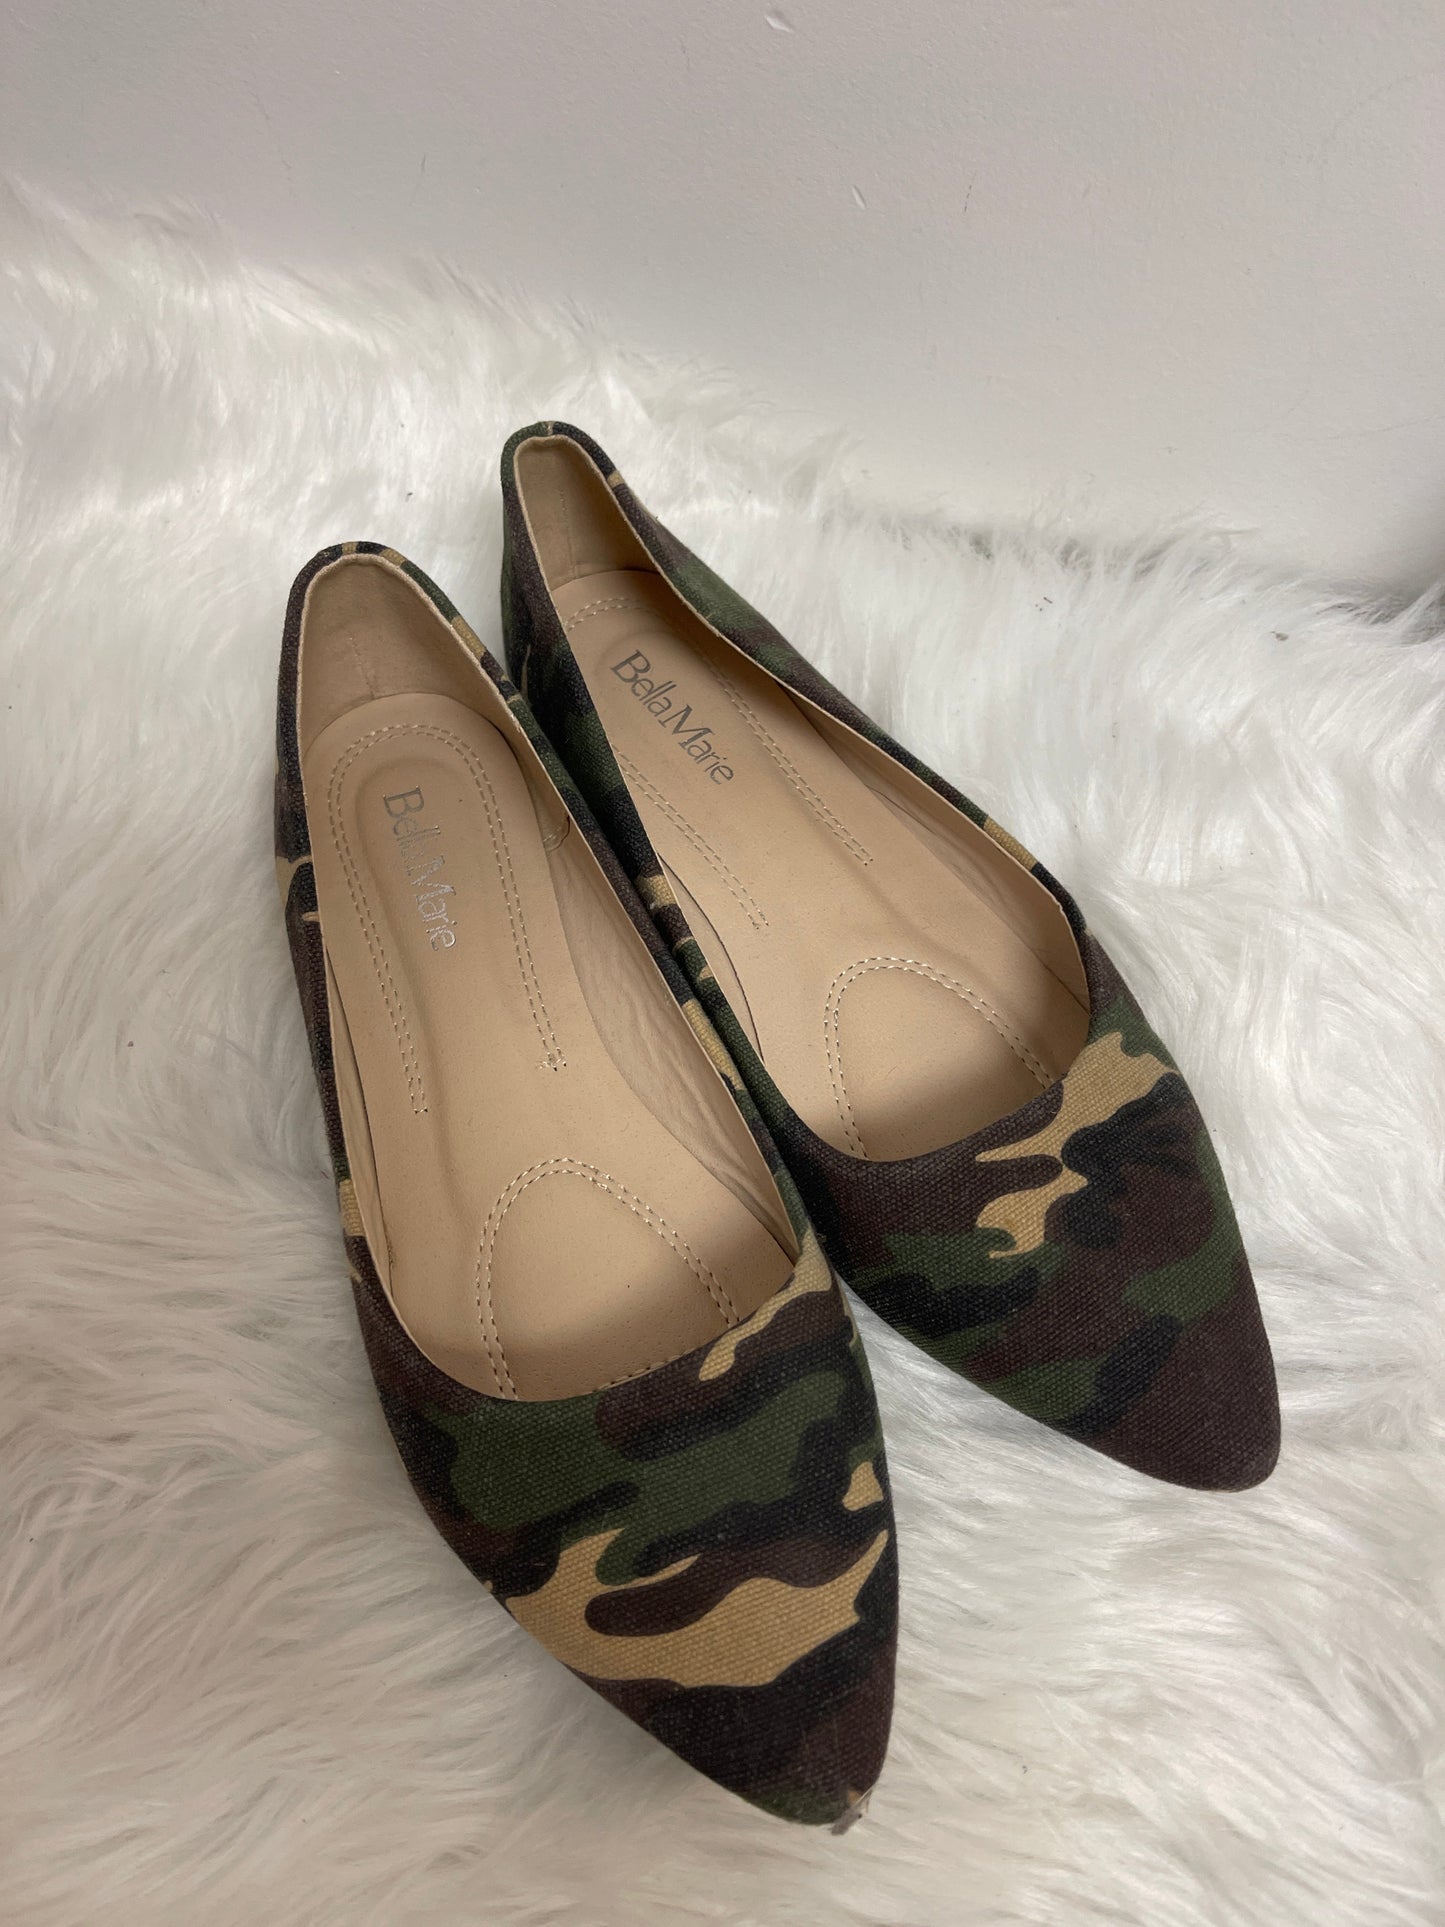 Camouflage Print Shoes Flats Bella Marie, Size 8.5